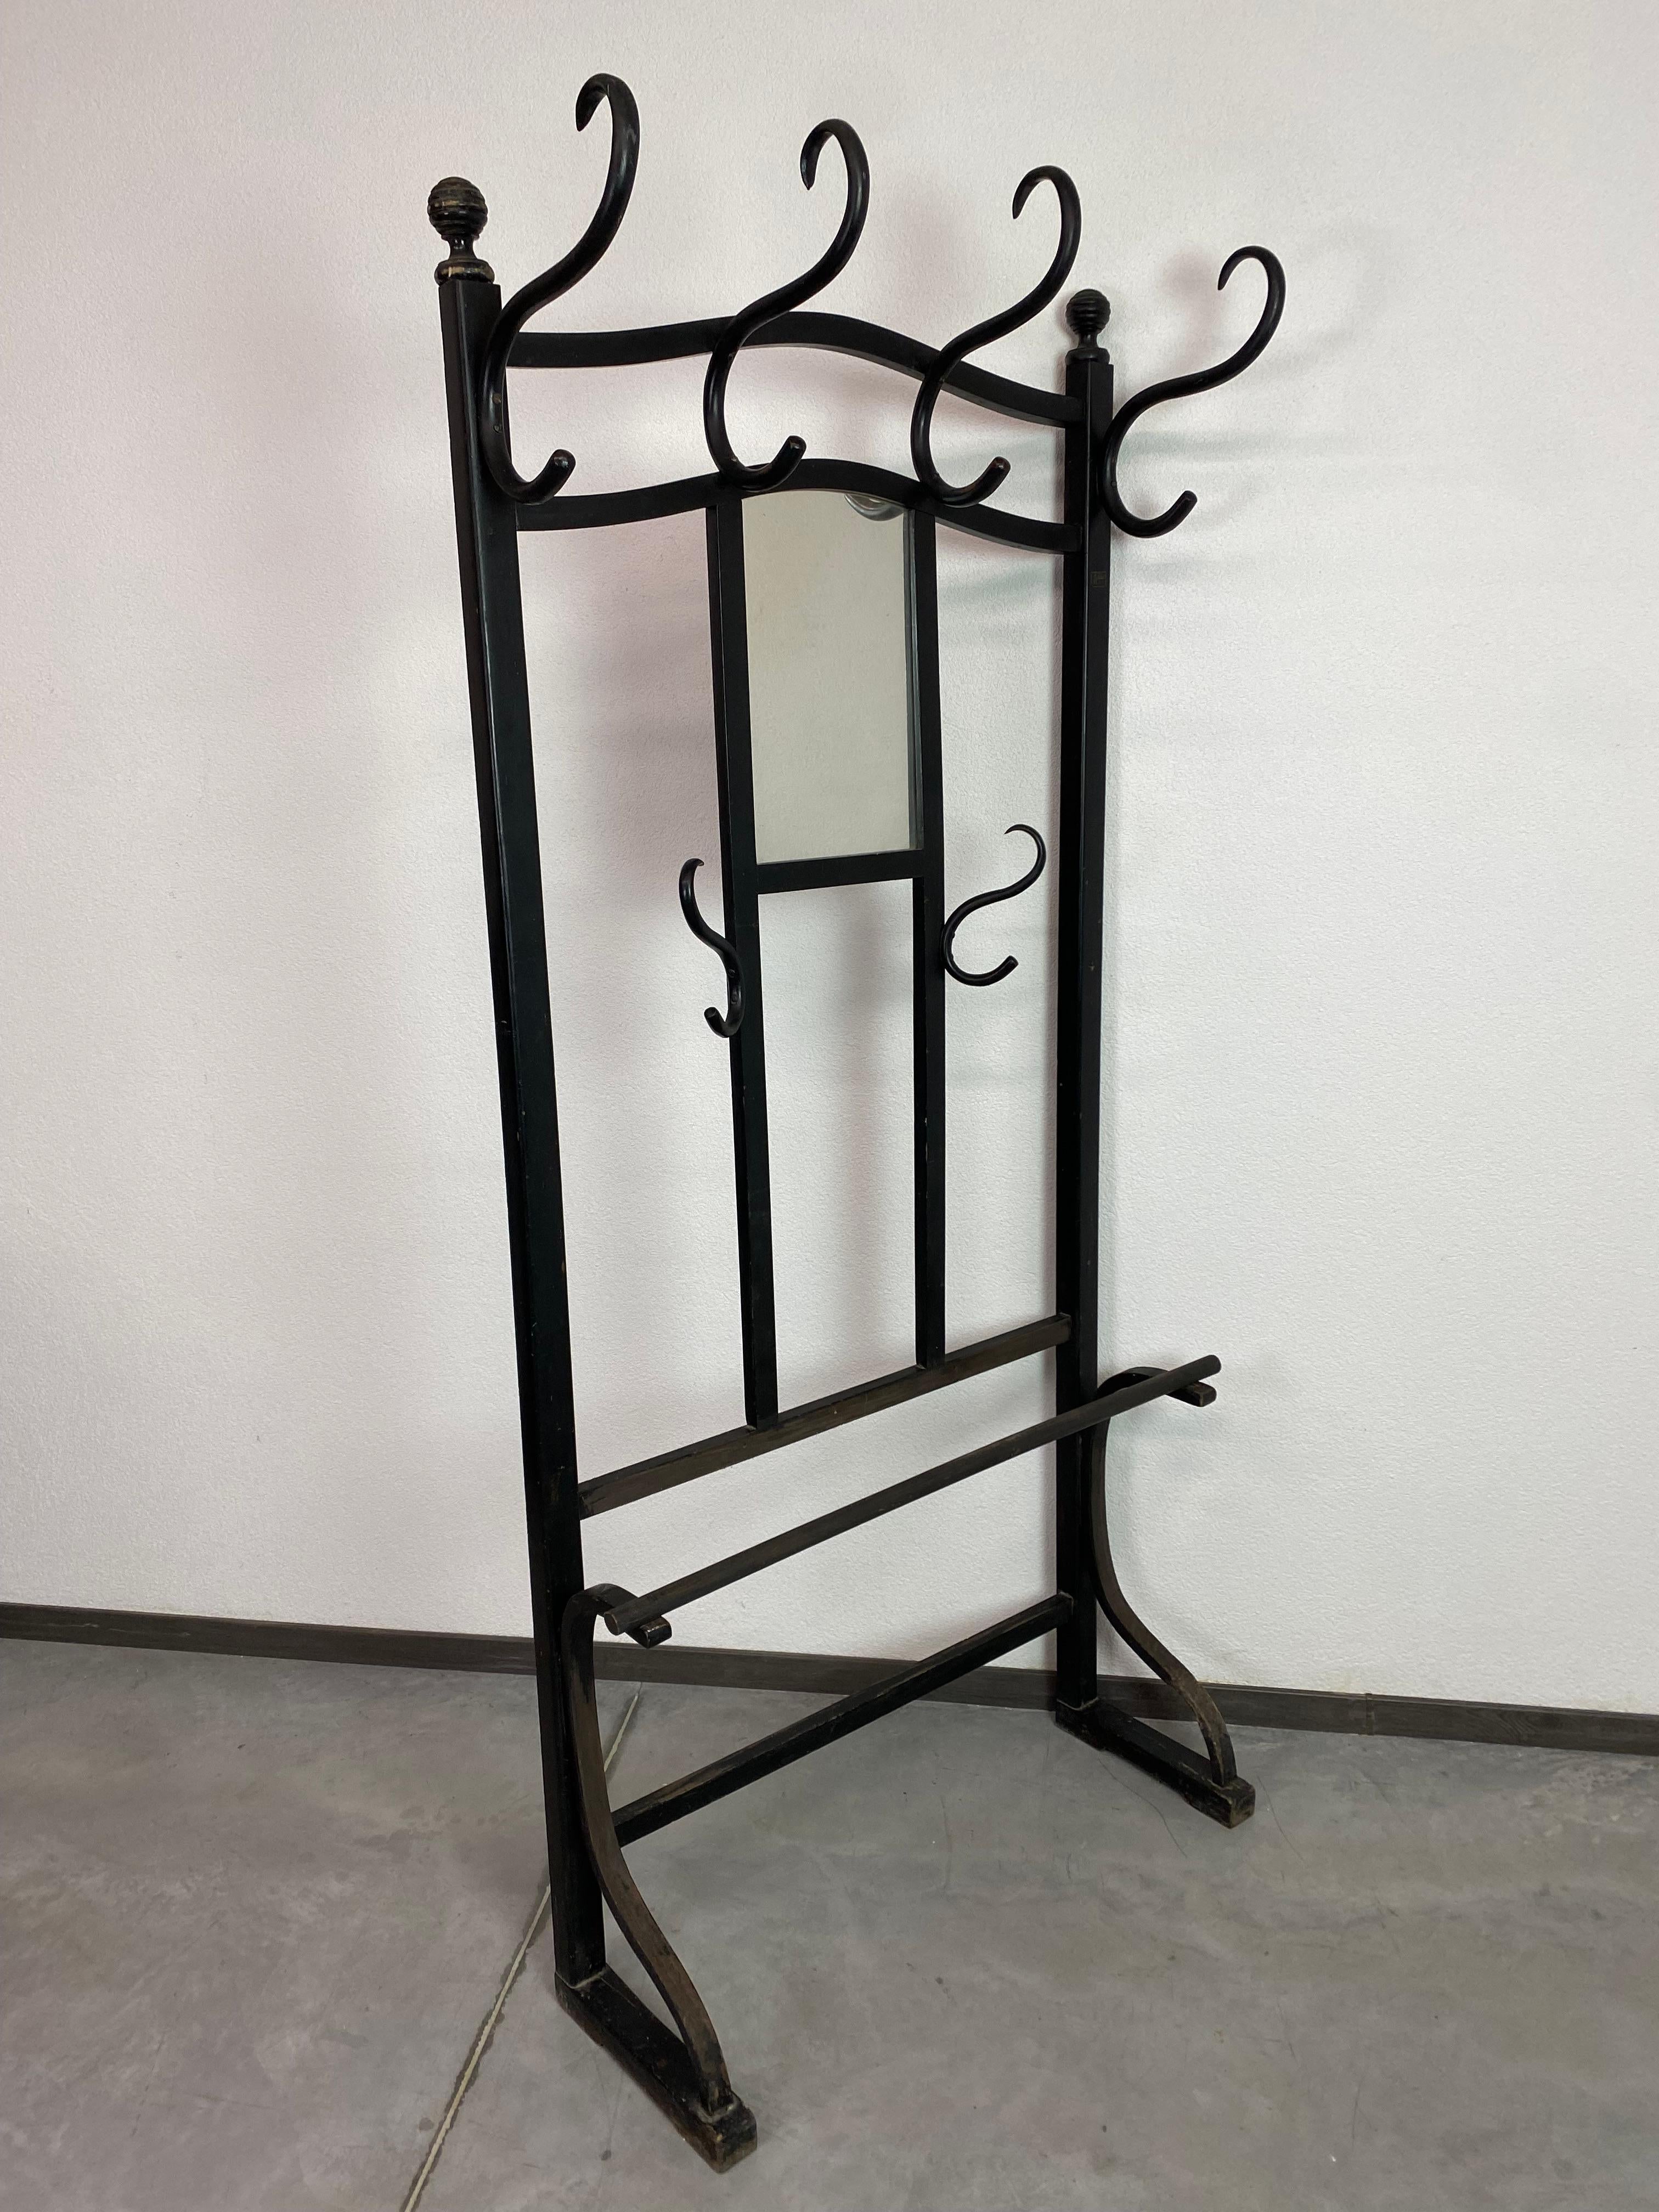 Wall coat rack no.905 by Thonet in original vintage condition.
